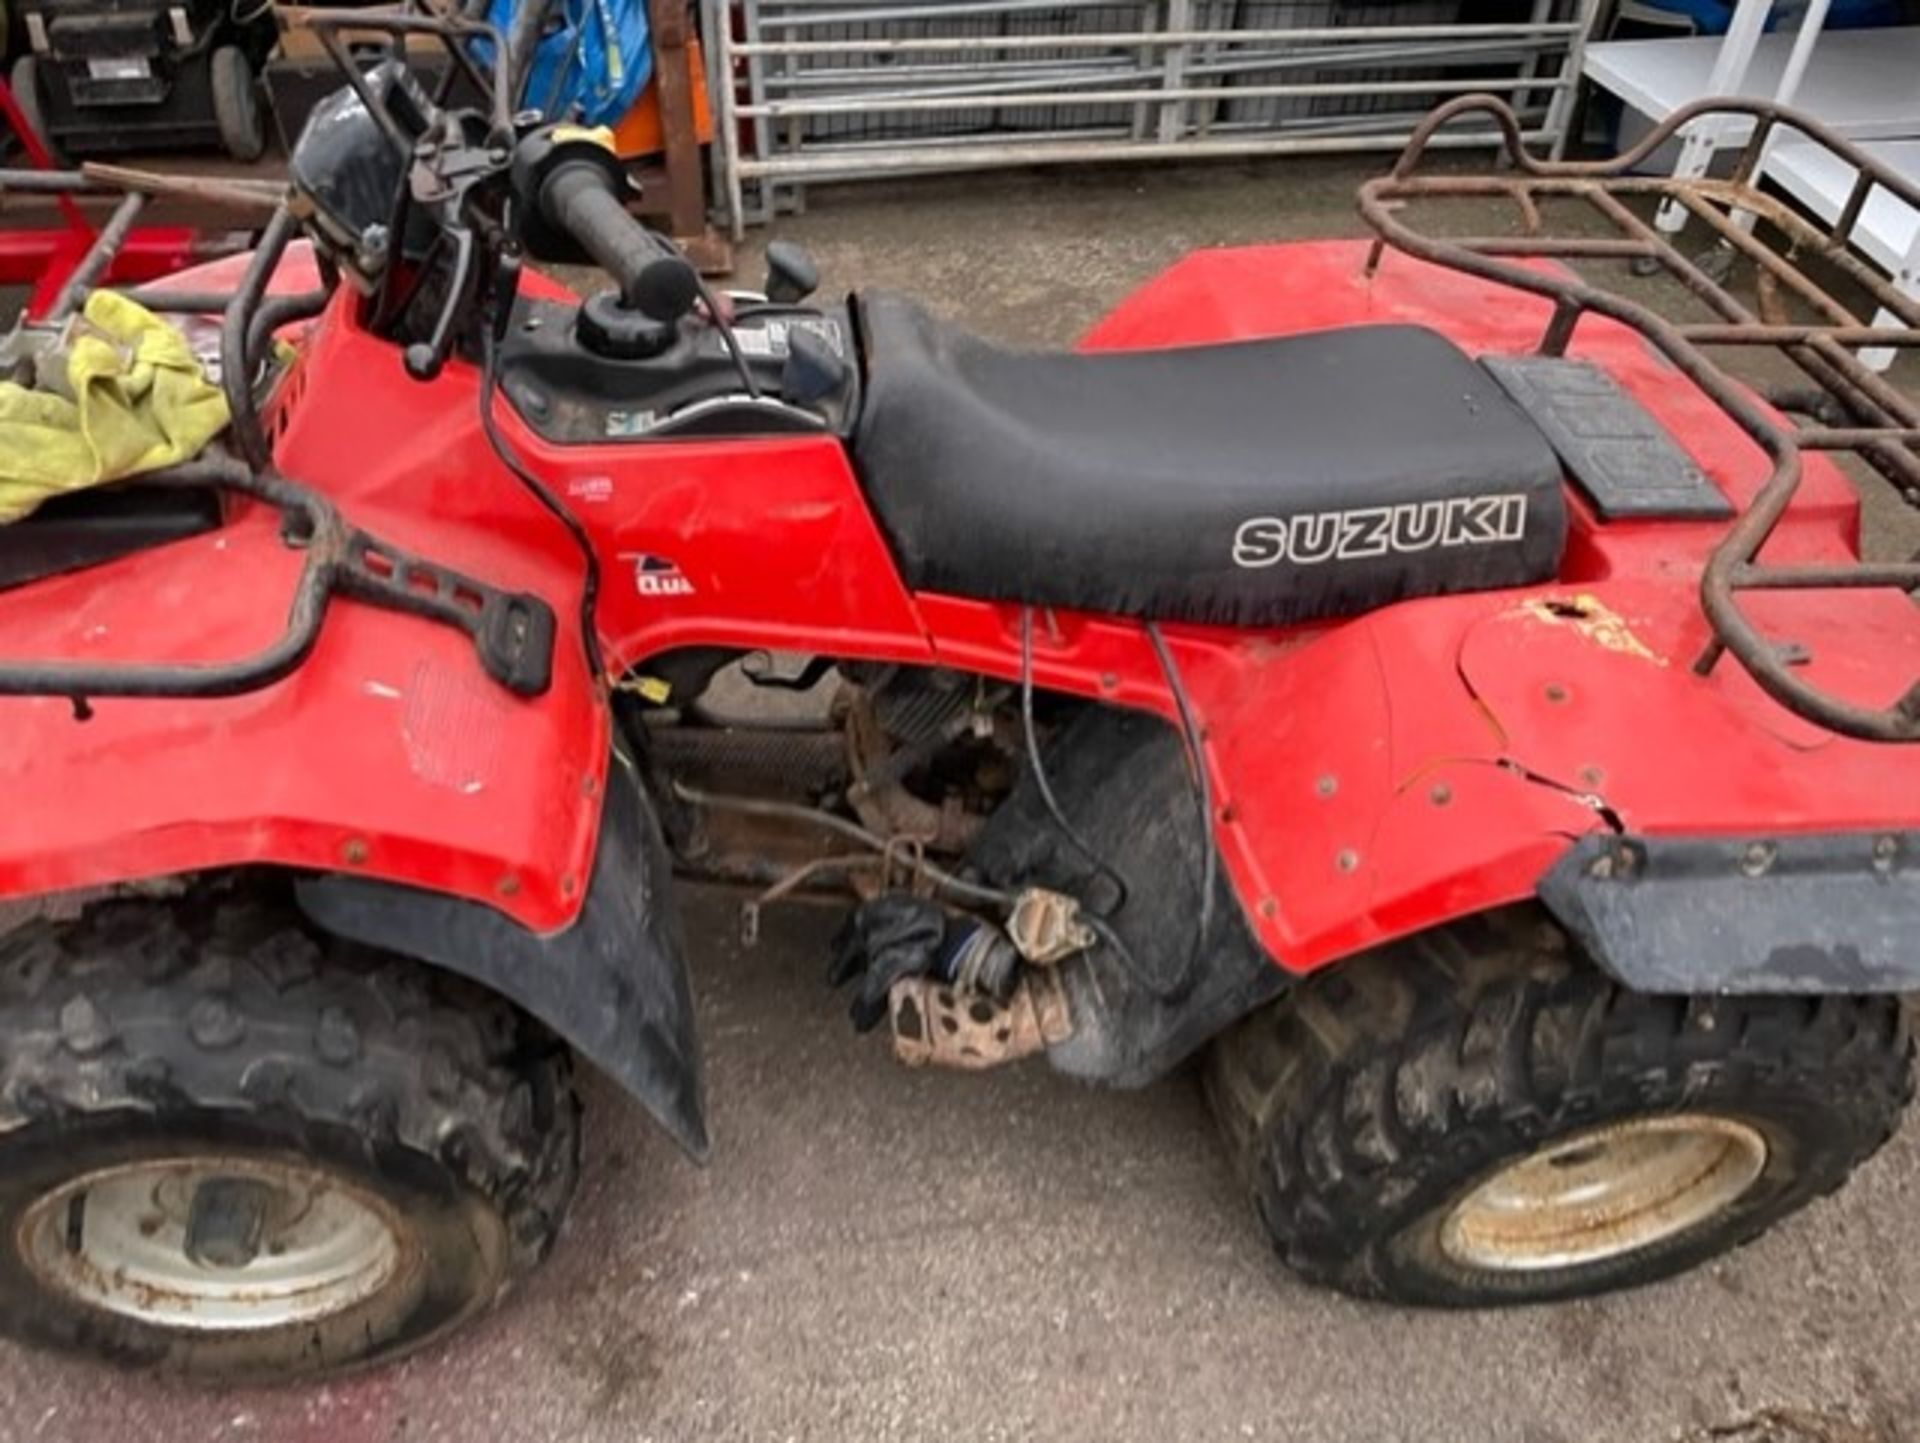 Suzuki quad 4wd 250 I think this is a non runner but it’s all complete electrics